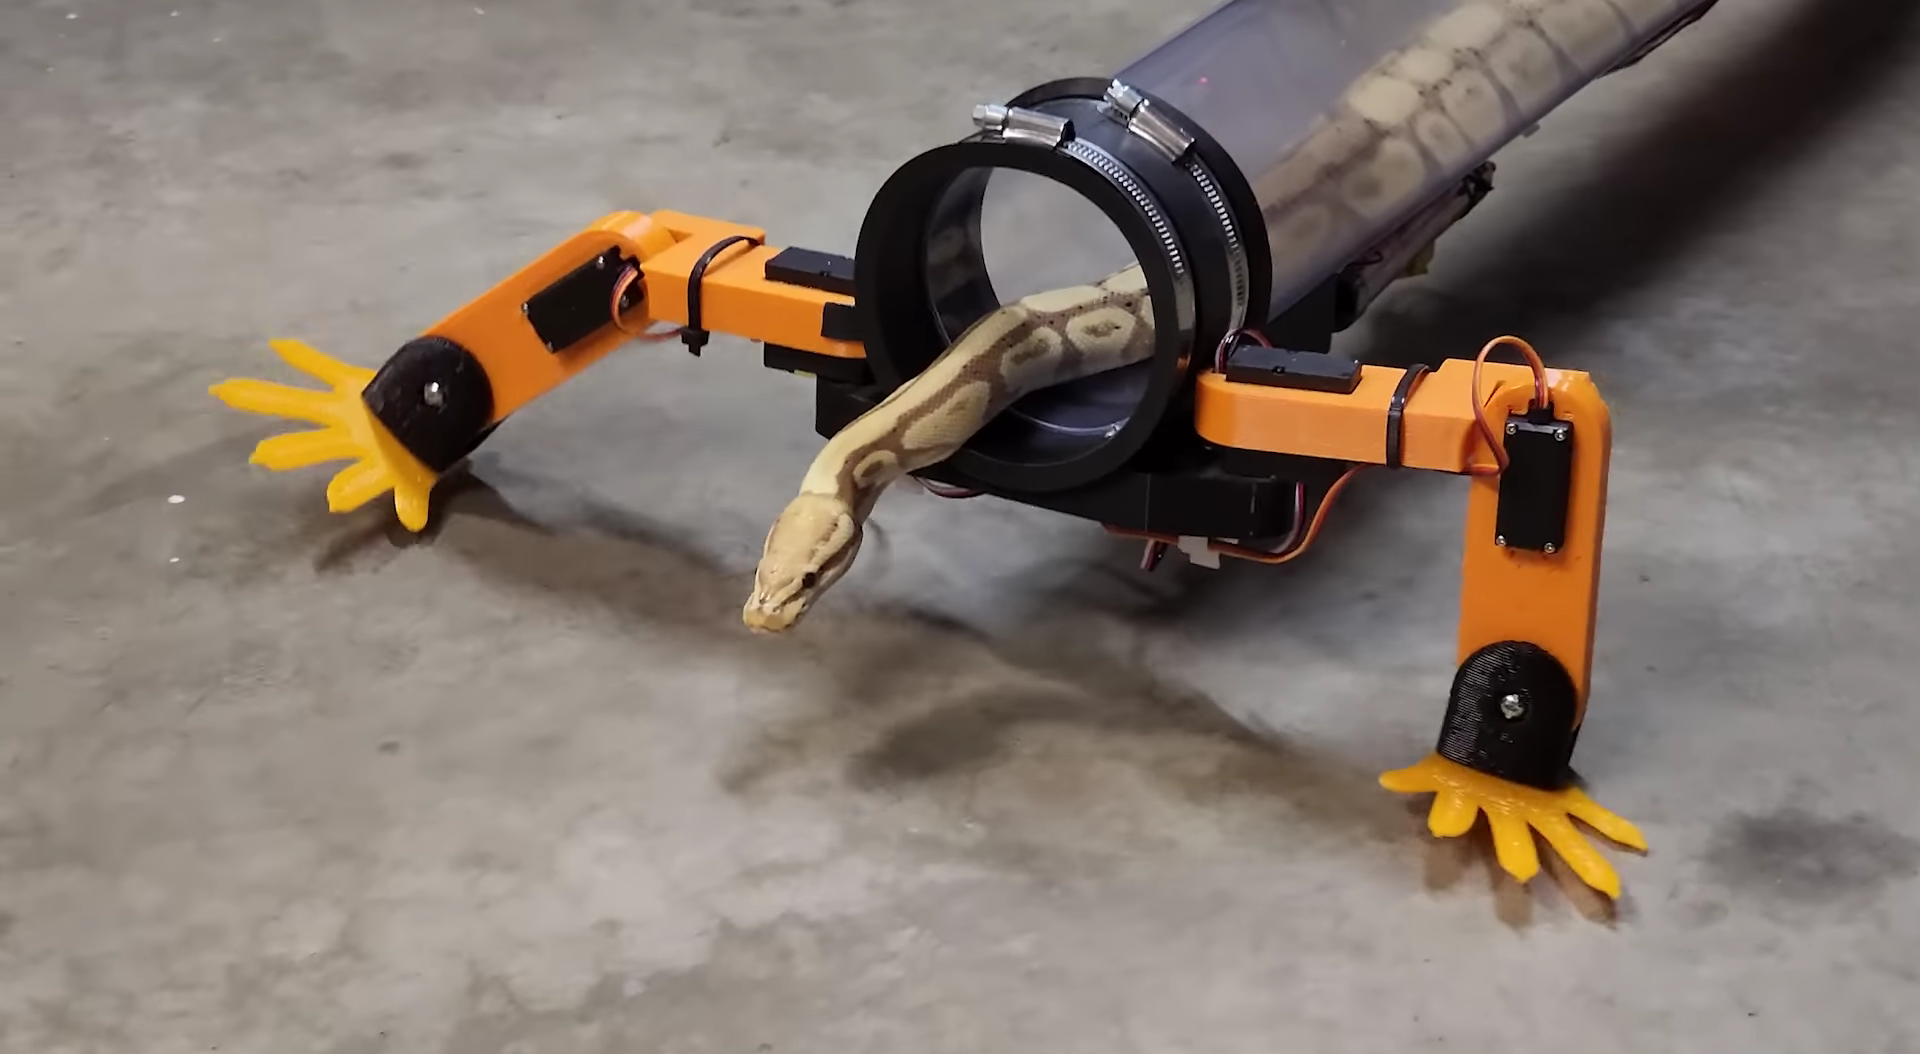 Engineer designed robotic legs for a snake - it liked them